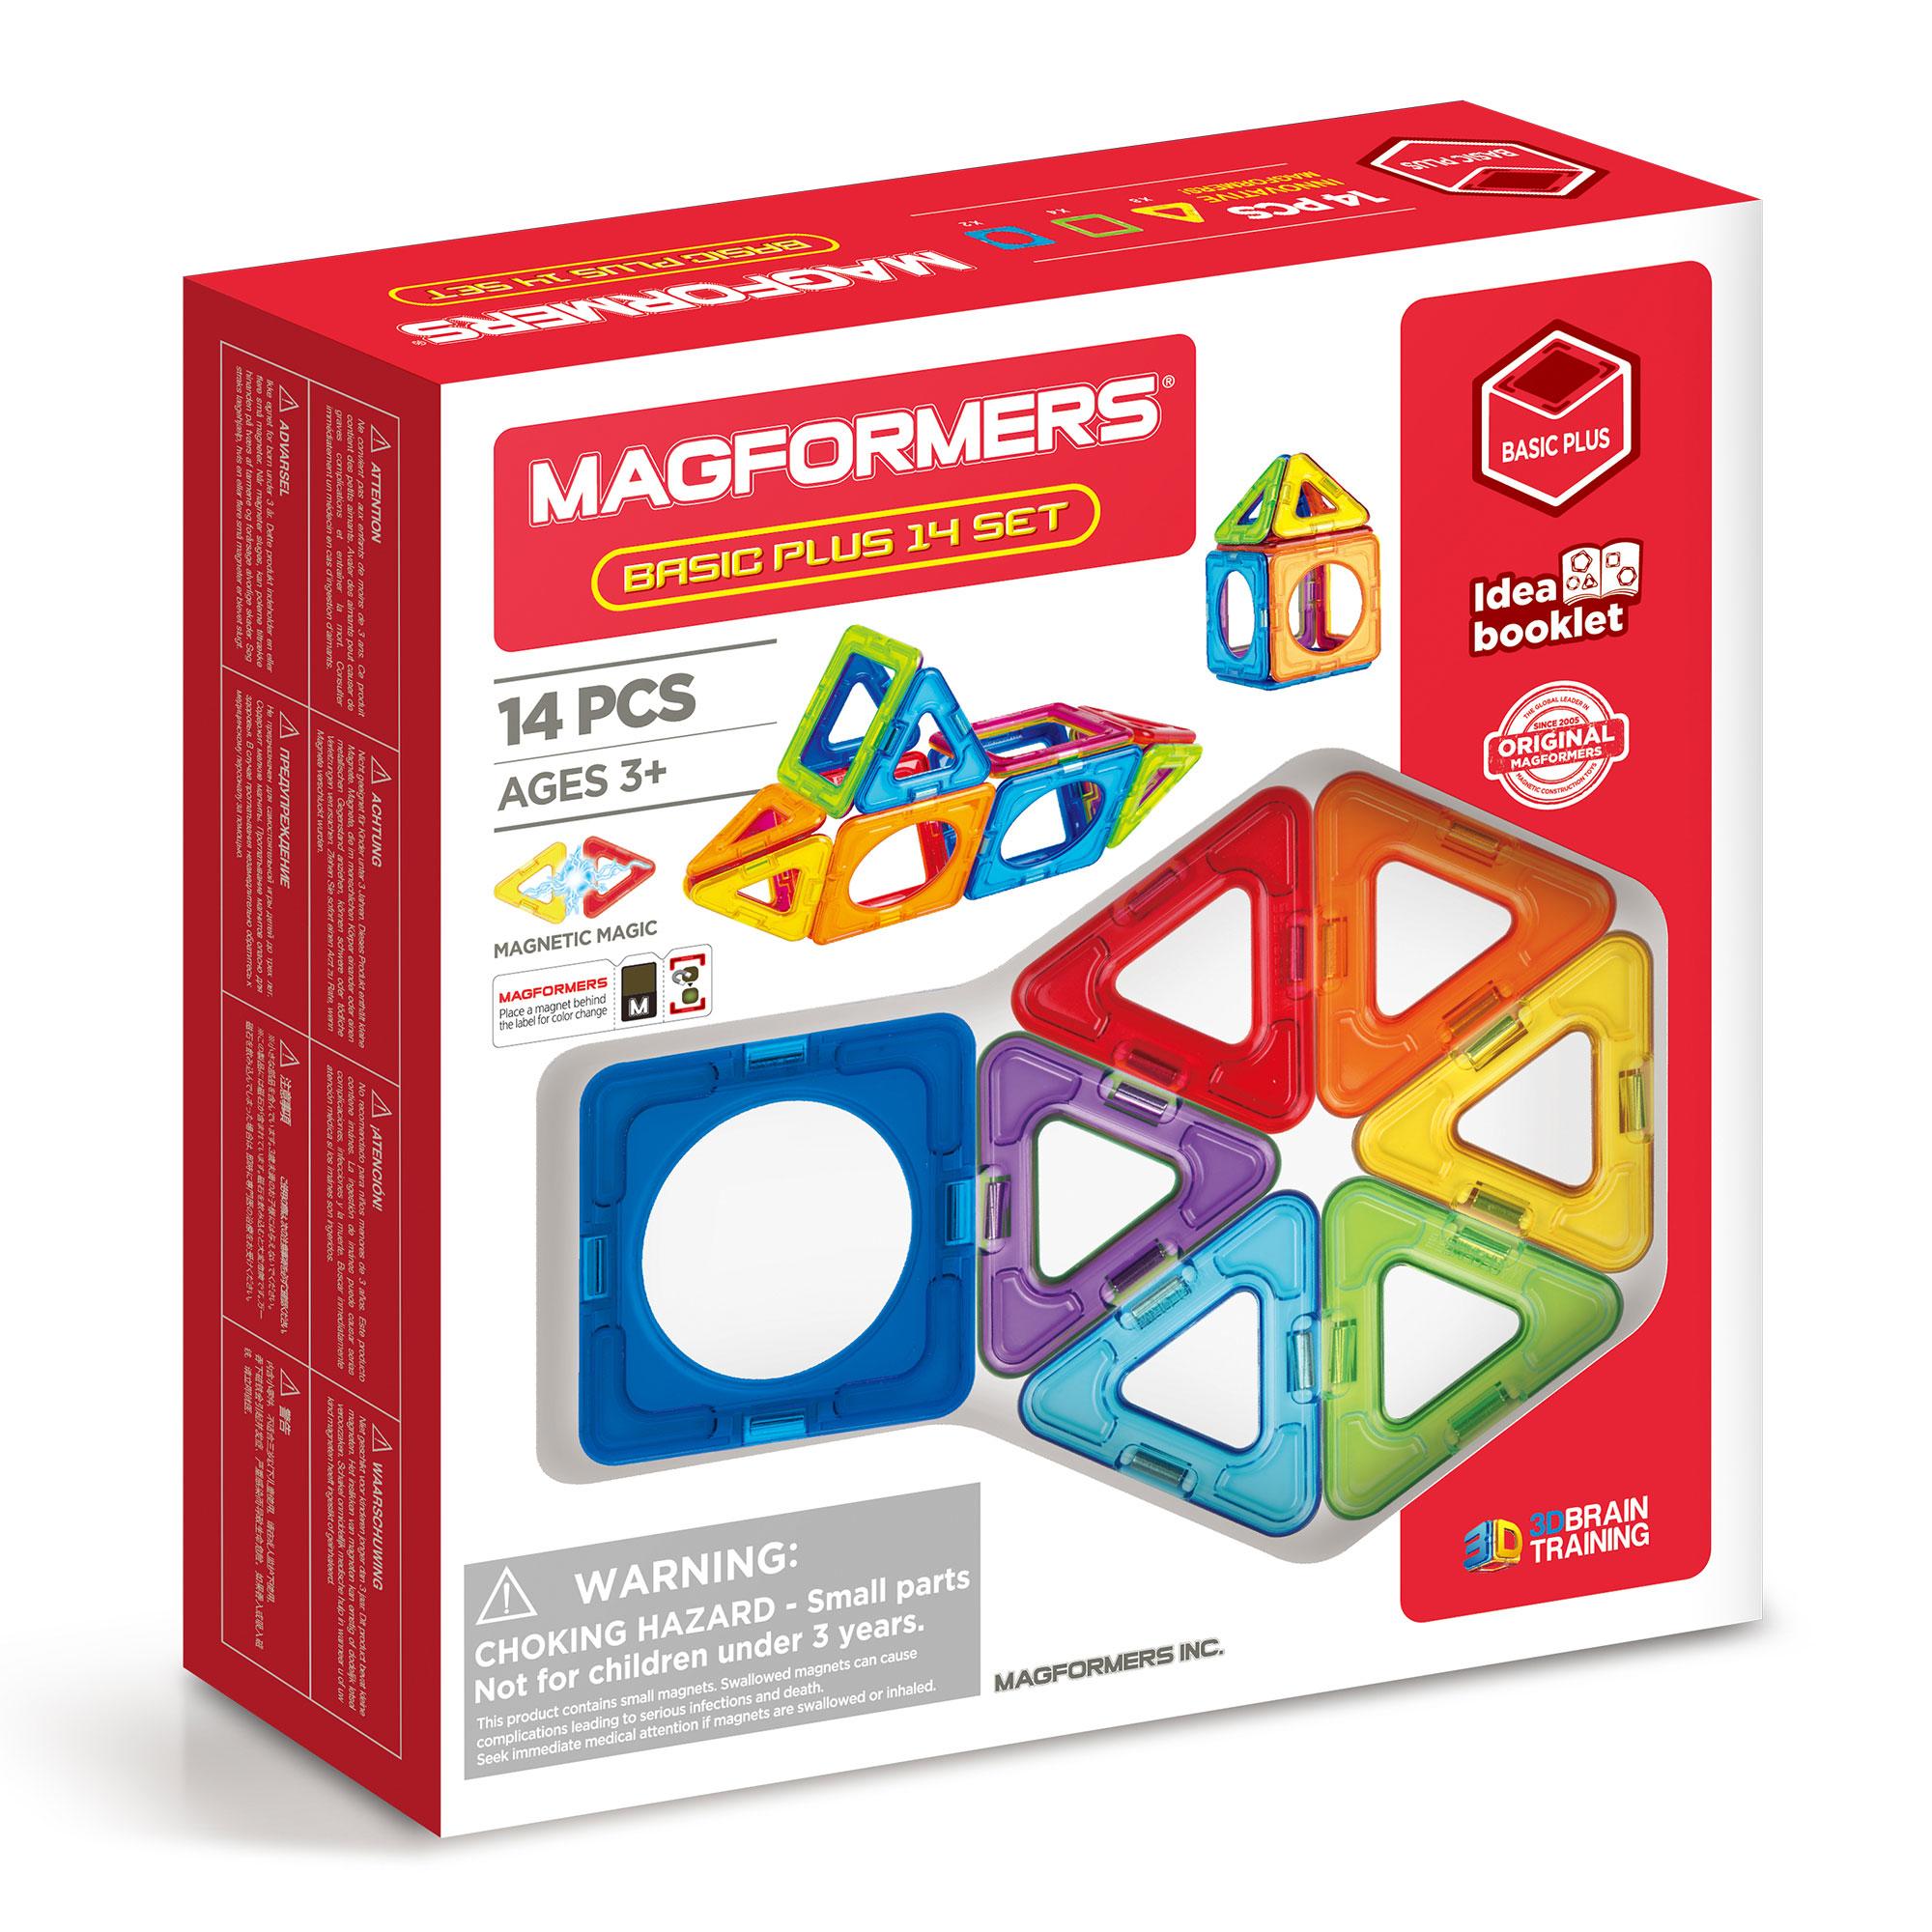 14 piece Magformers educational magnetic playpieces set, bright and colurful